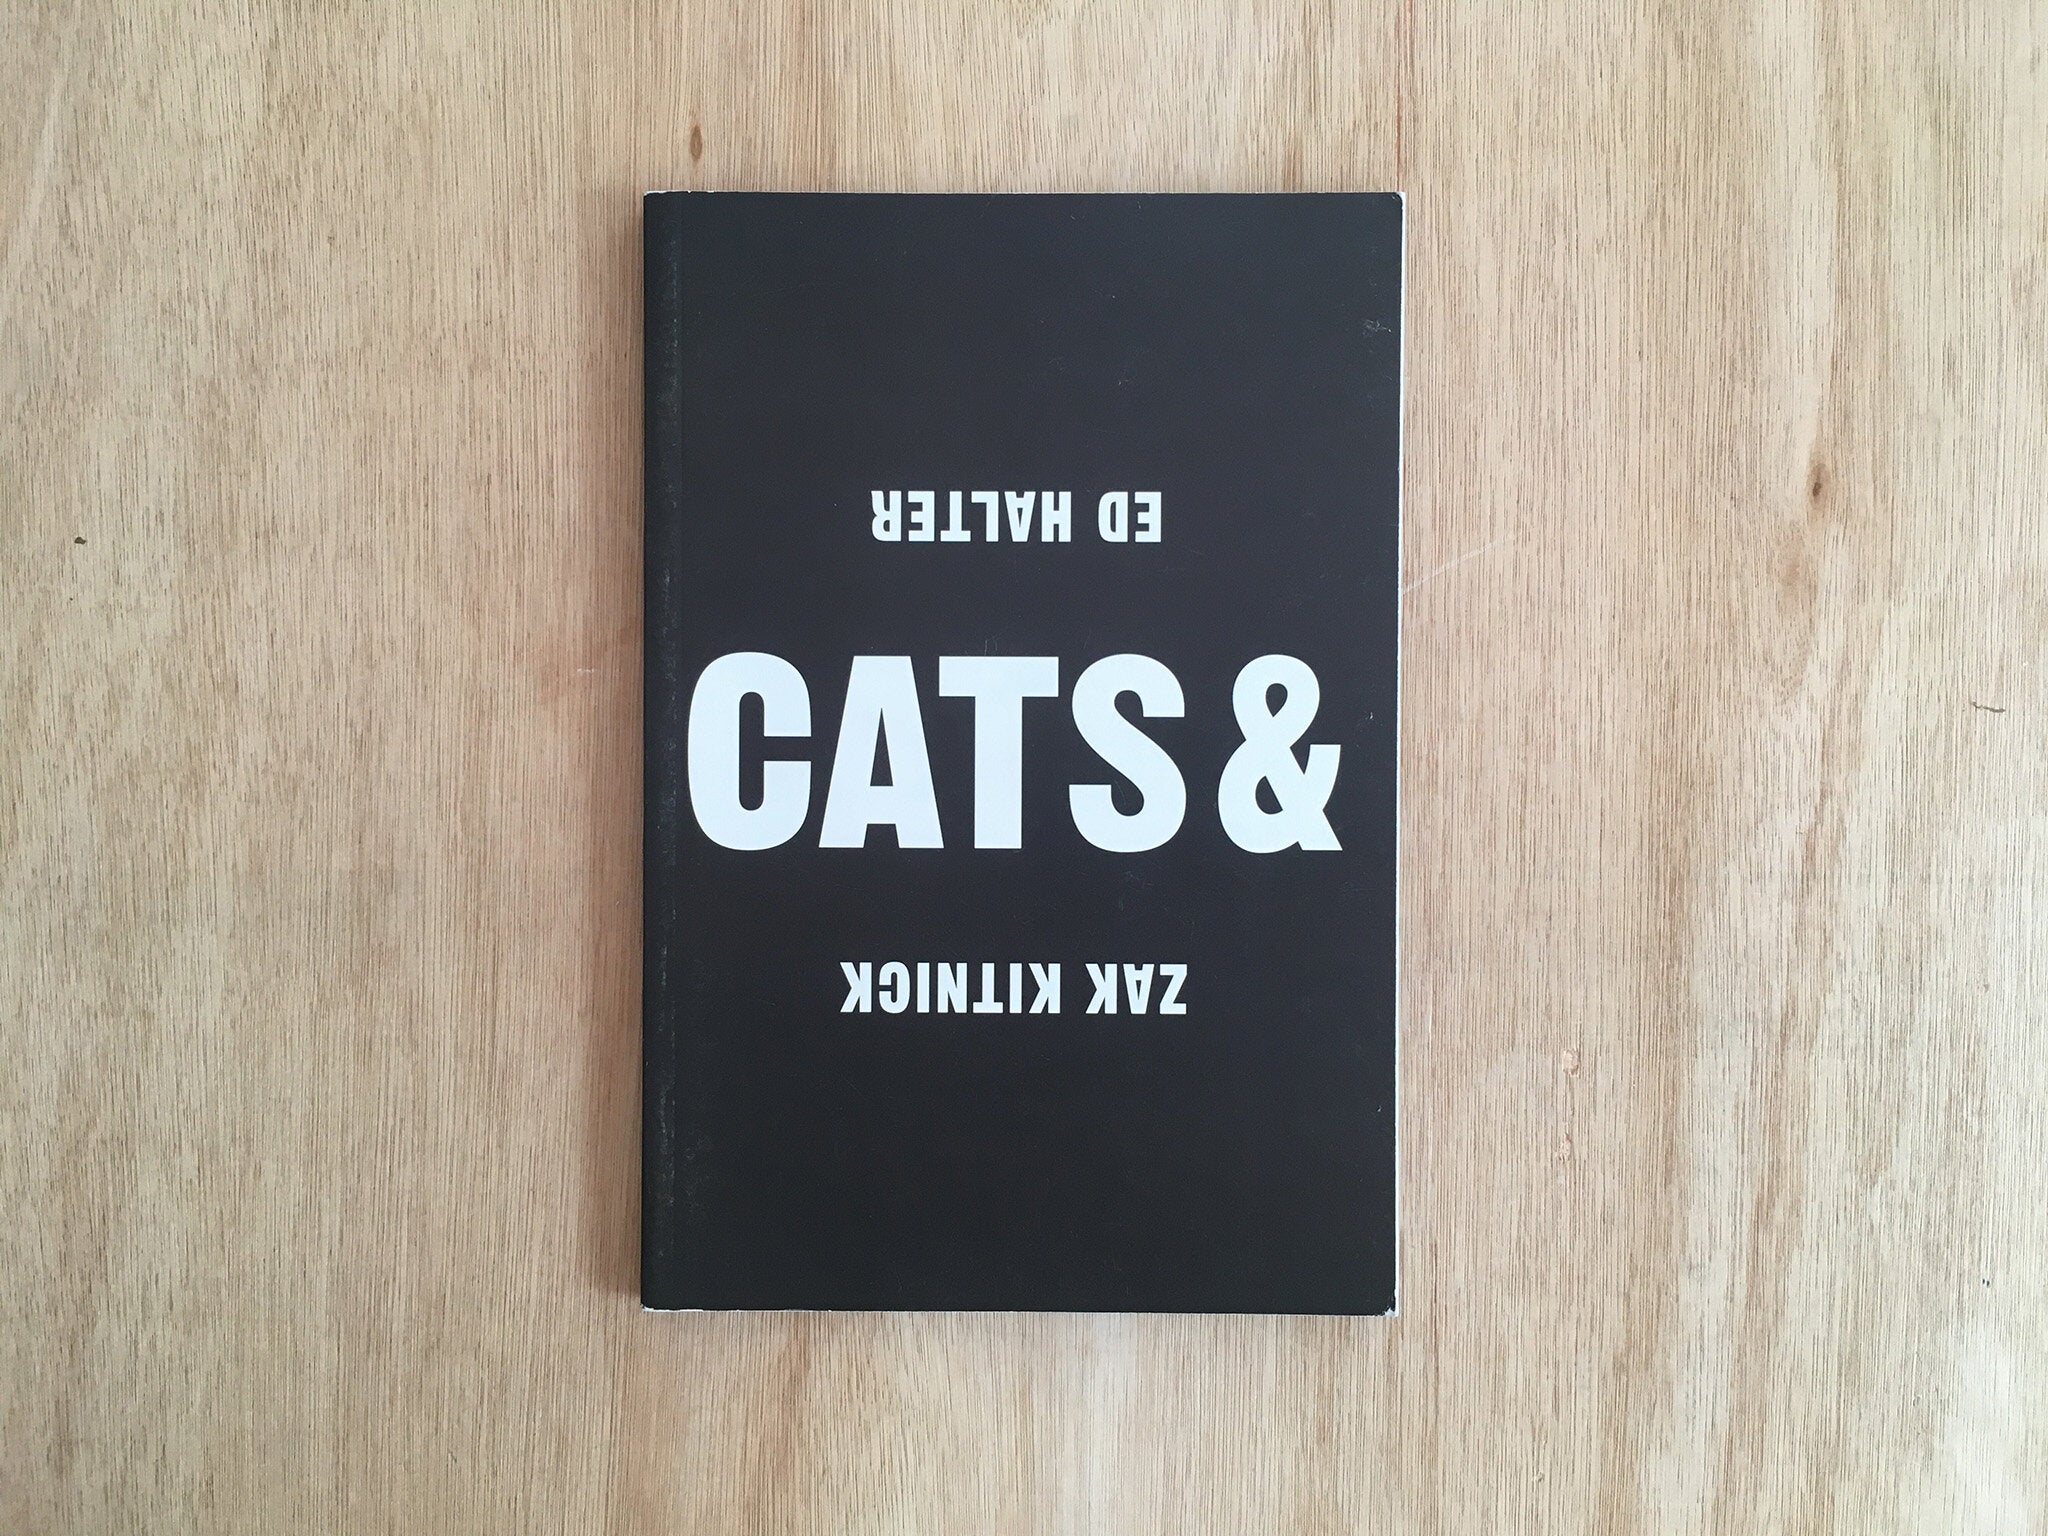 THE TRUTH ABOUT CATS & DOGS by Zak Kitnick & Ed Halter